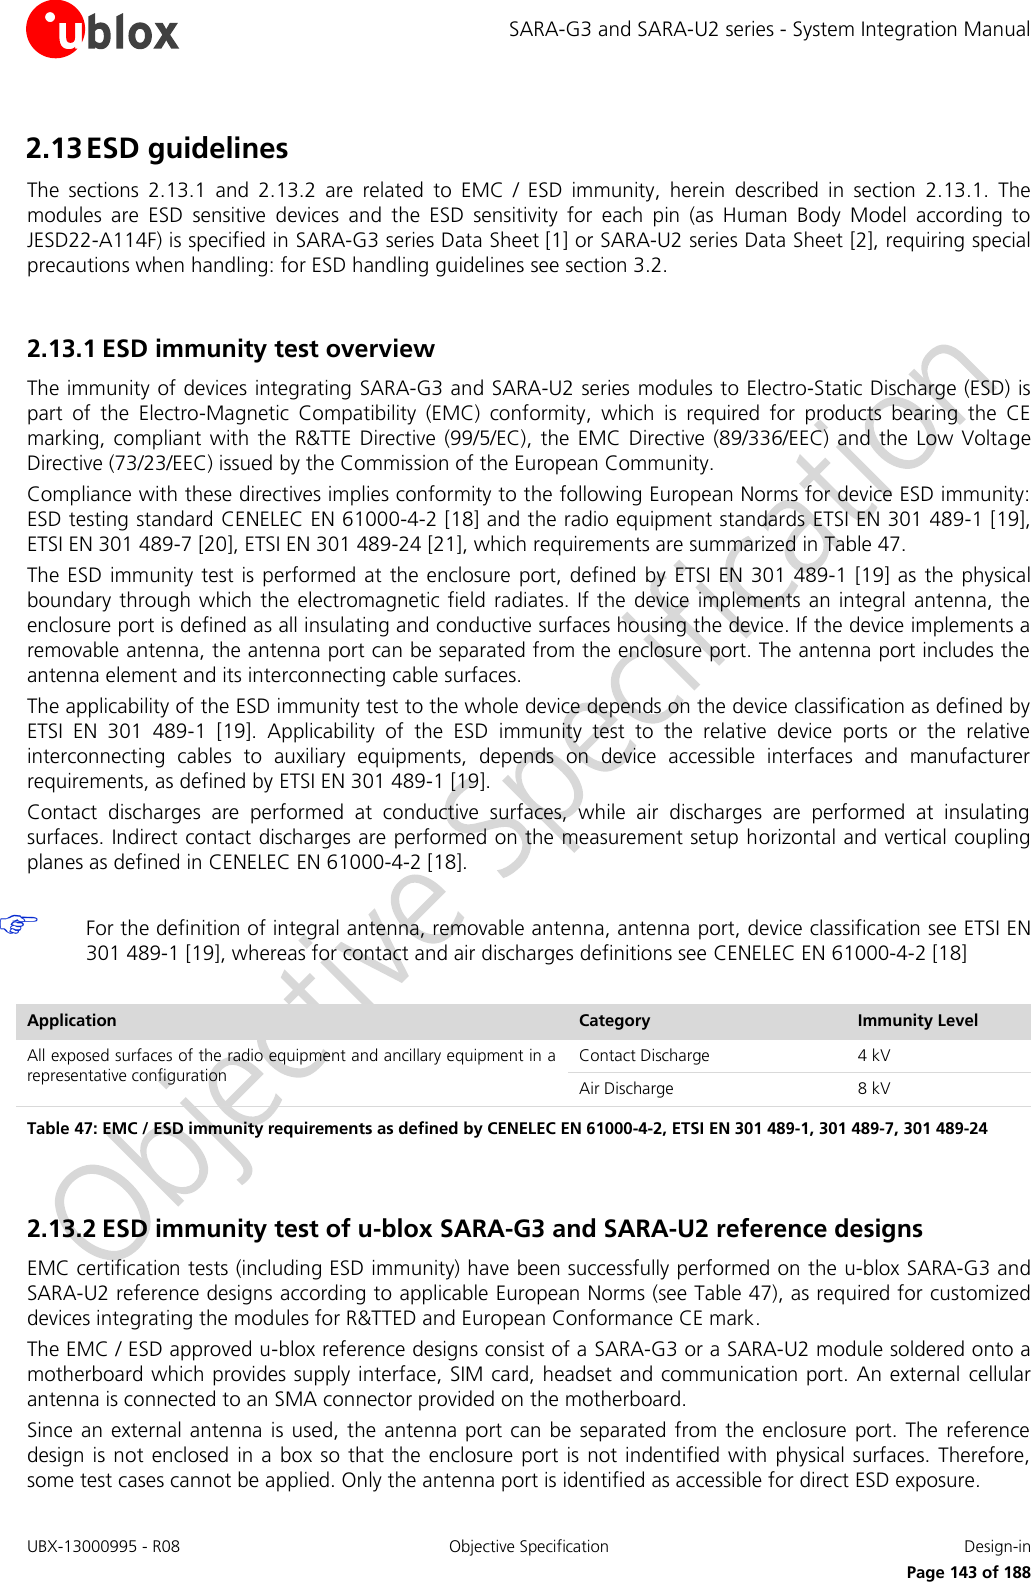 SARA-G3 and SARA-U2 series - System Integration Manual UBX-13000995 - R08  Objective Specification  Design-in     Page 143 of 188 2.13 ESD guidelines The  sections  2.13.1  and  2.13.2  are  related  to  EMC  /  ESD  immunity,  herein  described  in  section  2.13.1.  The modules  are  ESD  sensitive  devices  and  the  ESD  sensitivity  for  each  pin  (as  Human  Body  Model  according  to JESD22-A114F) is specified in SARA-G3 series Data Sheet [1] or SARA-U2 series Data Sheet [2], requiring special precautions when handling: for ESD handling guidelines see section 3.2.  2.13.1 ESD immunity test overview The immunity of devices integrating SARA-G3 and SARA-U2 series modules to Electro-Static Discharge (ESD) is part  of  the  Electro-Magnetic  Compatibility  (EMC)  conformity,  which  is  required  for  products  bearing  the  CE marking, compliant  with the  R&amp;TTE Directive (99/5/EC),  the EMC Directive  (89/336/EEC)  and the  Low  Voltage Directive (73/23/EEC) issued by the Commission of the European Community. Compliance with these directives implies conformity to the following European Norms for device ESD immunity: ESD testing standard CENELEC EN 61000-4-2 [18] and the radio equipment standards ETSI EN 301 489-1 [19], ETSI EN 301 489-7 [20], ETSI EN 301 489-24 [21], which requirements are summarized in Table 47. The ESD immunity test is performed at the  enclosure port,  defined by  ETSI EN 301  489-1  [19] as  the physical boundary through which the  electromagnetic field radiates. If the device implements an integral antenna,  the enclosure port is defined as all insulating and conductive surfaces housing the device. If the device implements a removable antenna, the antenna port can be separated from the enclosure port. The antenna port includes the antenna element and its interconnecting cable surfaces. The applicability of the ESD immunity test to the whole device depends on the device classification as defined by ETSI  EN  301  489-1  [19].  Applicability  of  the  ESD  immunity  test  to  the  relative  device  ports  or  the  relative interconnecting  cables  to  auxiliary  equipments,  depends  on  device  accessible  interfaces  and  manufacturer requirements, as defined by ETSI EN 301 489-1 [19]. Contact  discharges  are  performed  at  conductive  surfaces,  while  air  discharges  are  performed  at  insulating surfaces. Indirect contact discharges are performed on the measurement setup horizontal and vertical coupling planes as defined in CENELEC EN 61000-4-2 [18].   For the definition of integral antenna, removable antenna, antenna port, device classification see ETSI EN 301 489-1 [19], whereas for contact and air discharges definitions see CENELEC EN 61000-4-2 [18]  Application Category Immunity Level All exposed surfaces of the radio equipment and ancillary equipment in a representative configuration Contact Discharge 4 kV Air Discharge 8 kV Table 47: EMC / ESD immunity requirements as defined by CENELEC EN 61000-4-2, ETSI EN 301 489-1, 301 489-7, 301 489-24   2.13.2 ESD immunity test of u-blox SARA-G3 and SARA-U2 reference designs EMC certification tests (including ESD immunity) have been successfully performed on the u-blox SARA-G3 and SARA-U2 reference designs according to applicable European Norms (see Table 47), as required for customized devices integrating the modules for R&amp;TTED and European Conformance CE mark. The EMC / ESD approved u-blox reference designs consist of a SARA-G3 or a SARA-U2 module soldered onto a motherboard which provides supply interface, SIM card, headset and communication port. An external  cellular antenna is connected to an SMA connector provided on the motherboard. Since an  external antenna is  used, the  antenna port can  be separated from  the enclosure port. The reference design is not enclosed in a box so that  the enclosure  port is  not indentified  with physical  surfaces. Therefore, some test cases cannot be applied. Only the antenna port is identified as accessible for direct ESD exposure. 